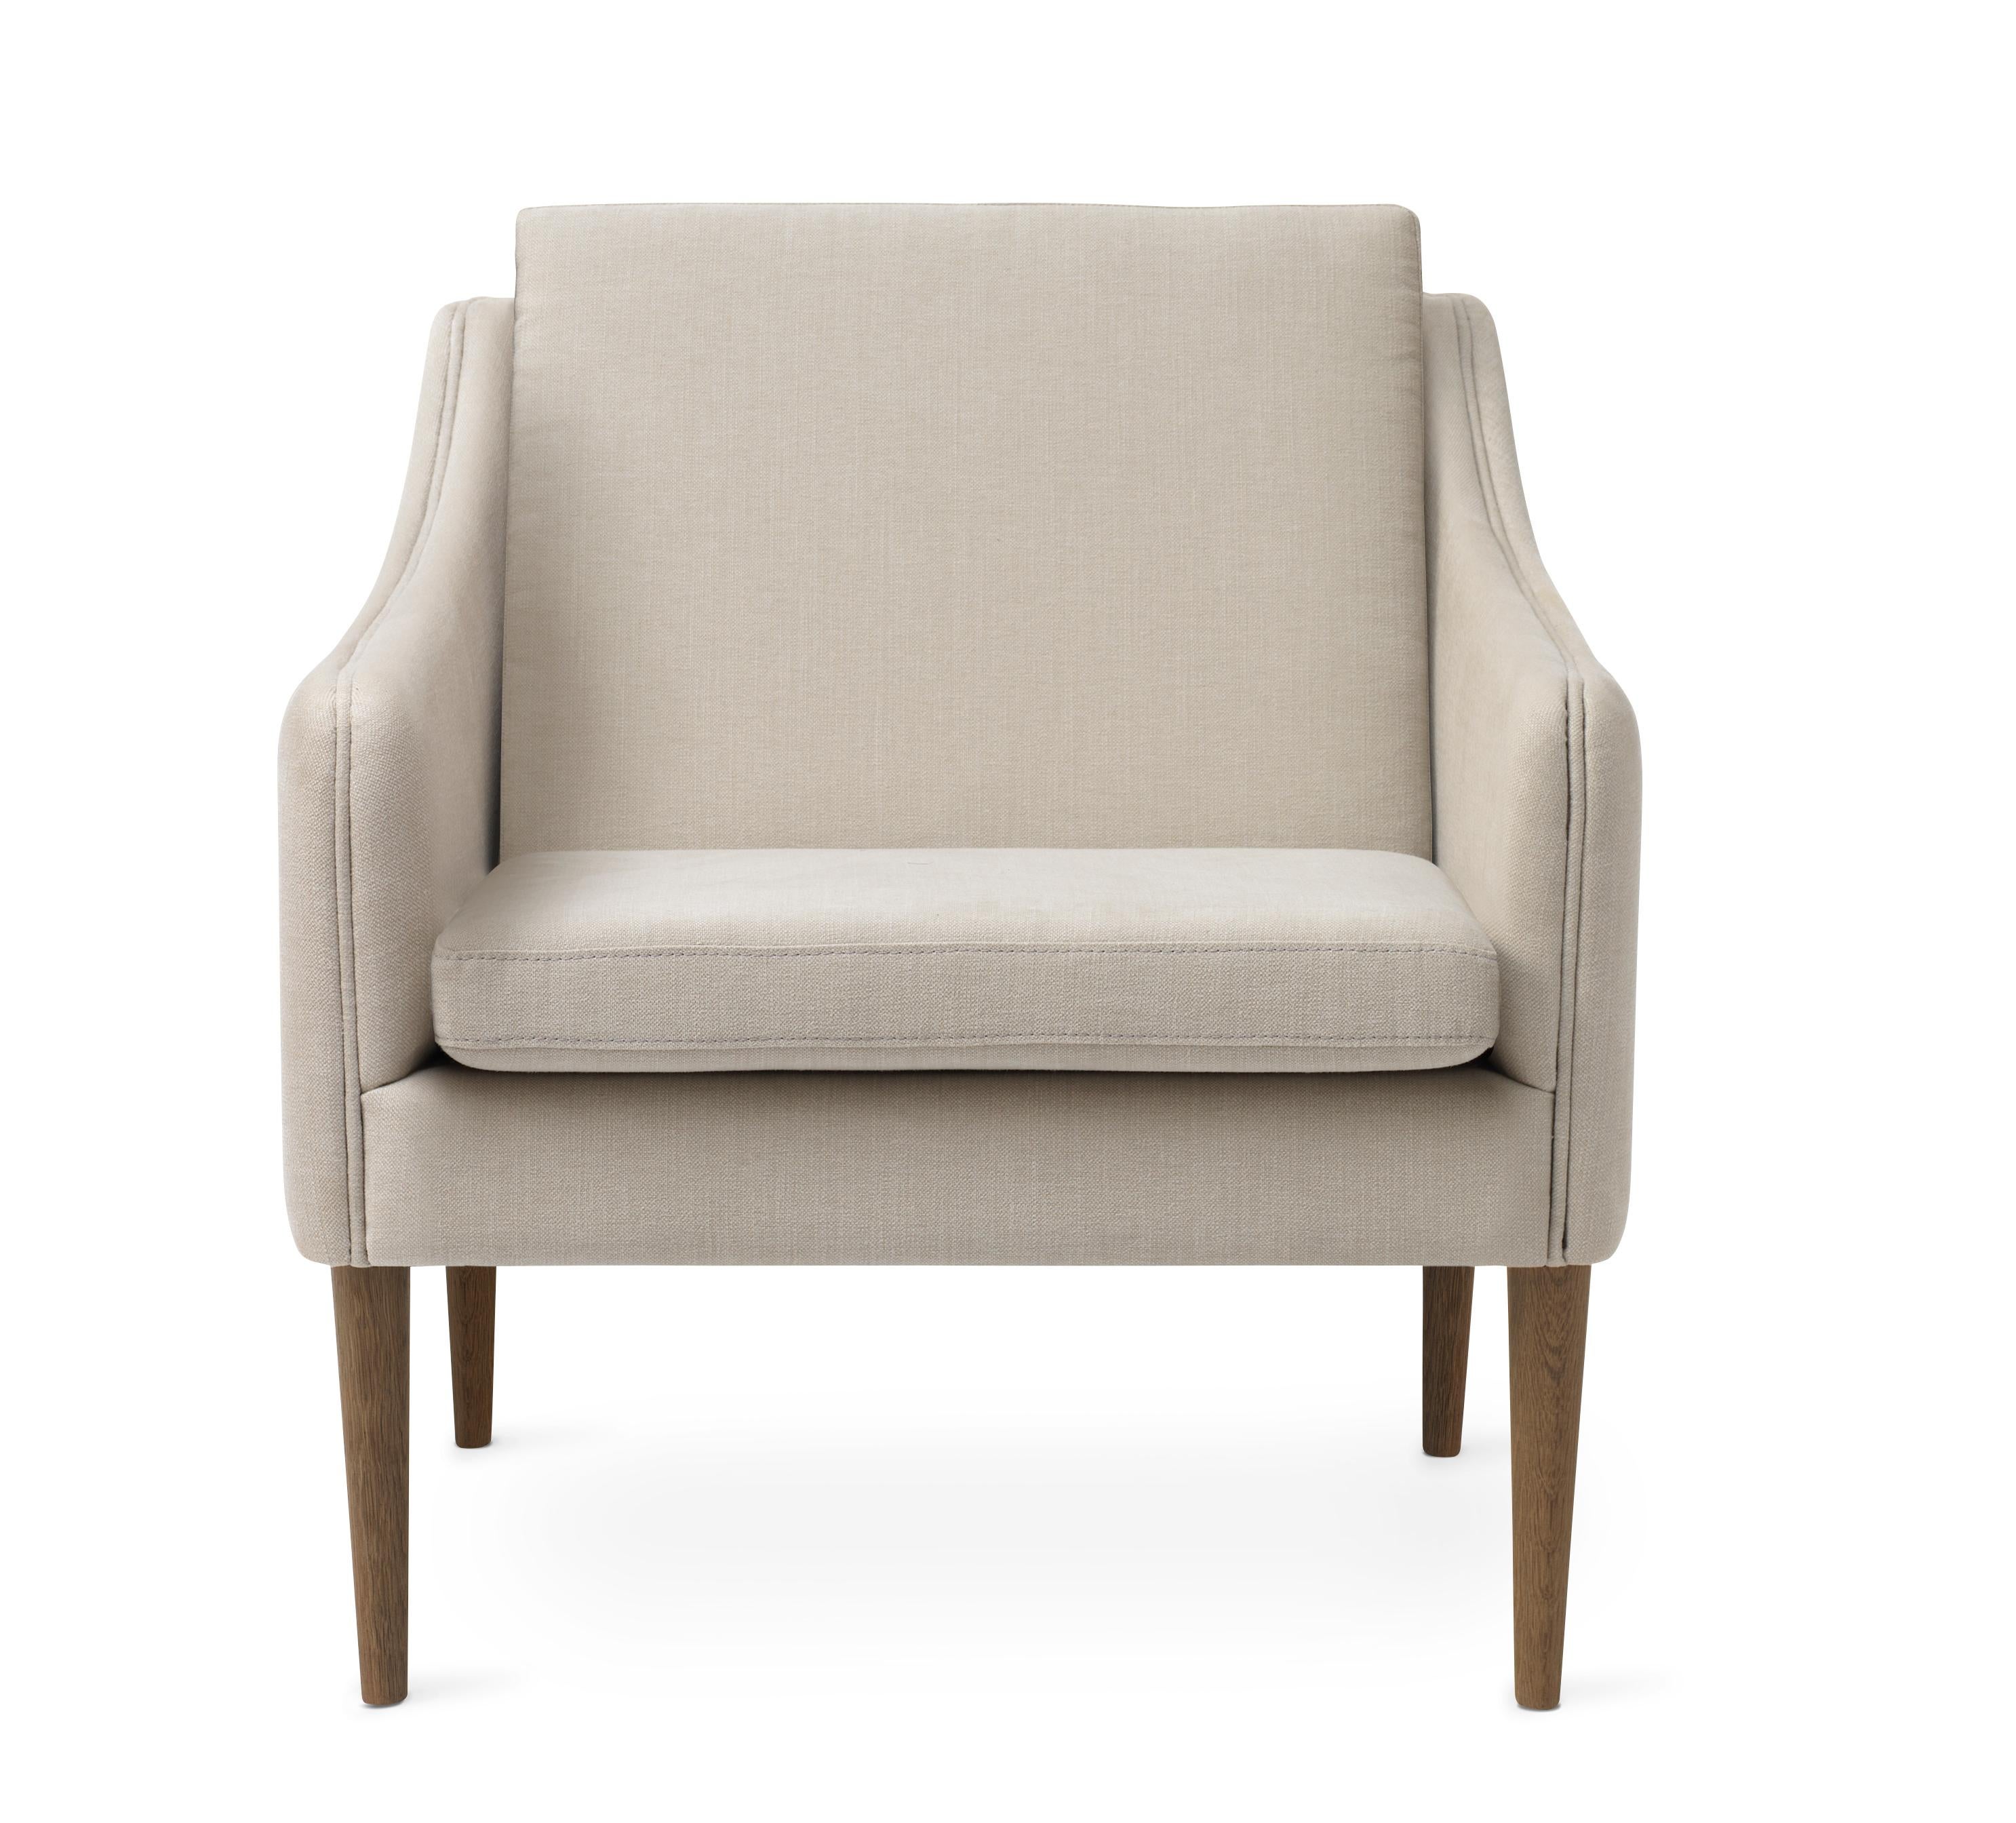 For Sale: Beige (Caleido 3790) Mr. Olsen Lounge Chair with Smoked Oak Legs, by Hans Olsen from Warm Nordic